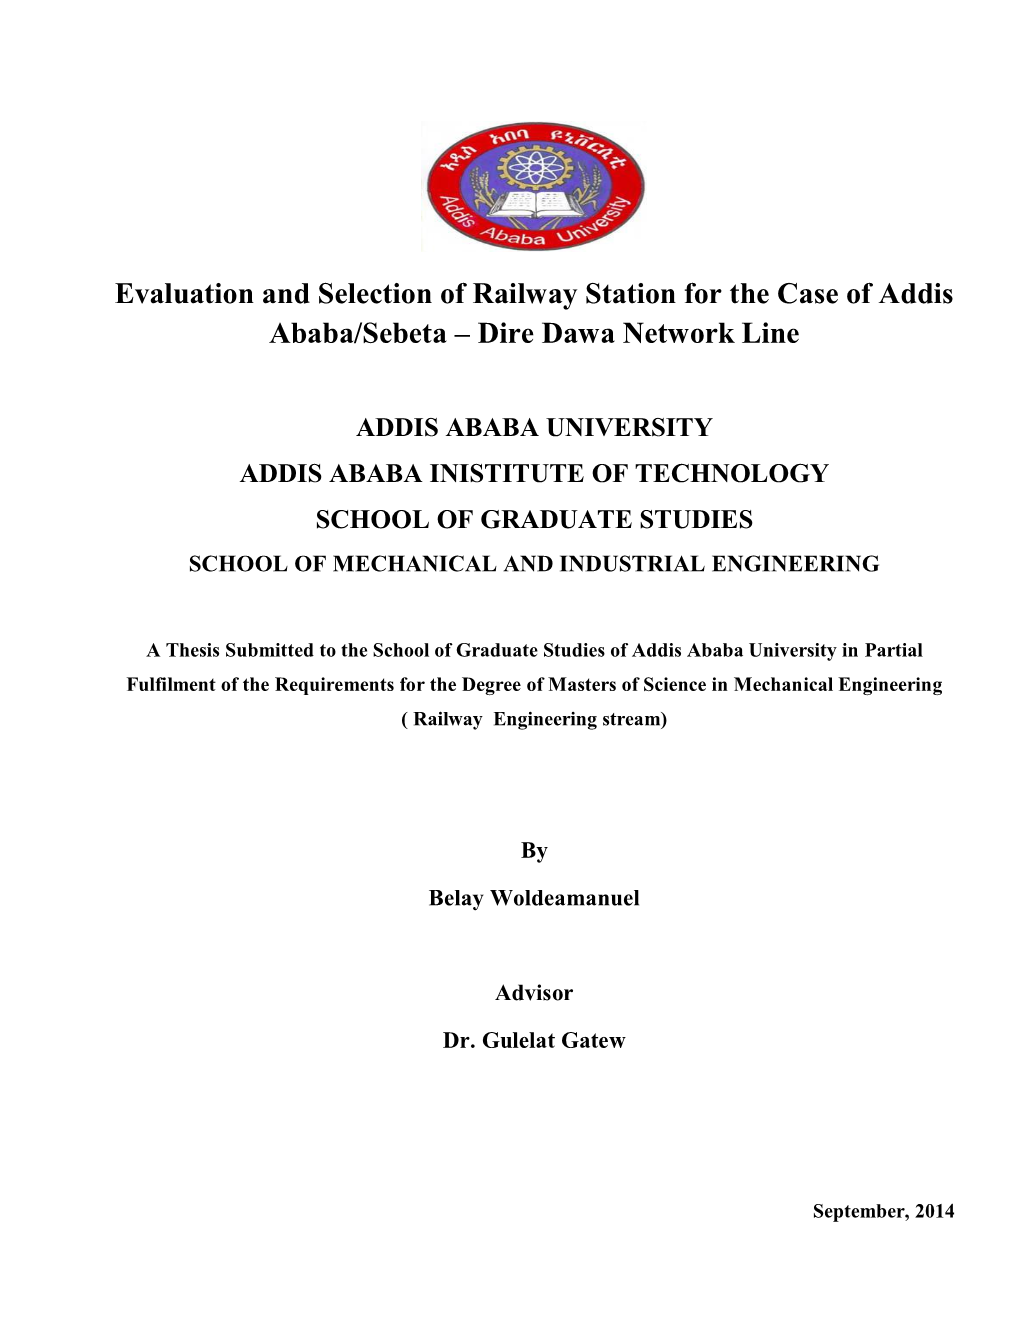 Evaluation and Selection of Railway Station for the Case of Addis Ababa/Sebeta – Dire Dawa Network Line